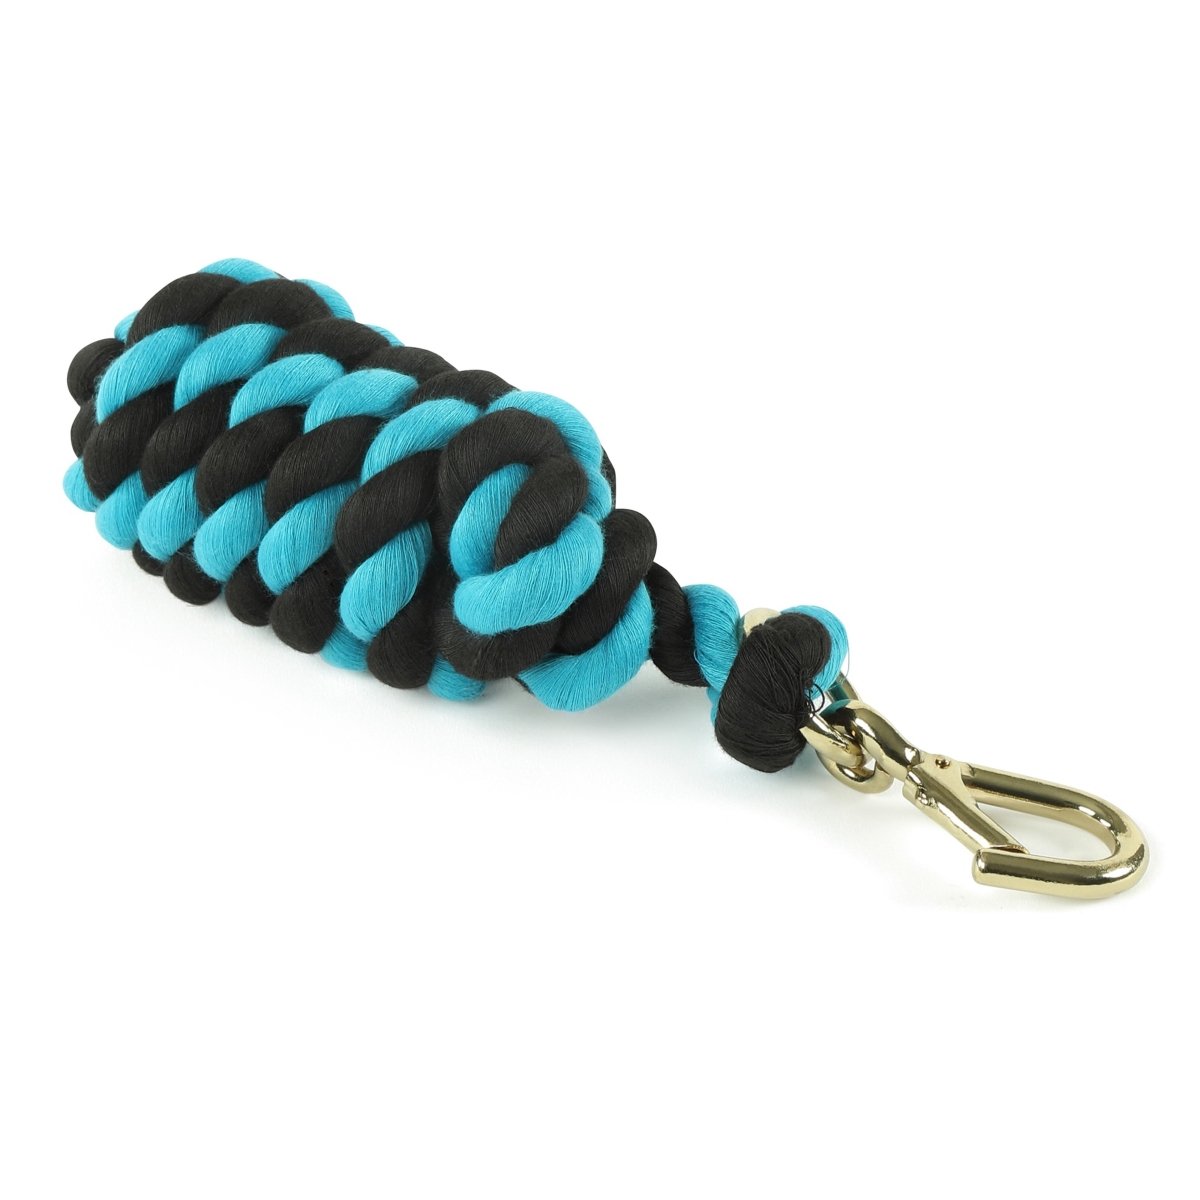 Shires Two Tone Headcollar Lead Rope - Black/Teal -